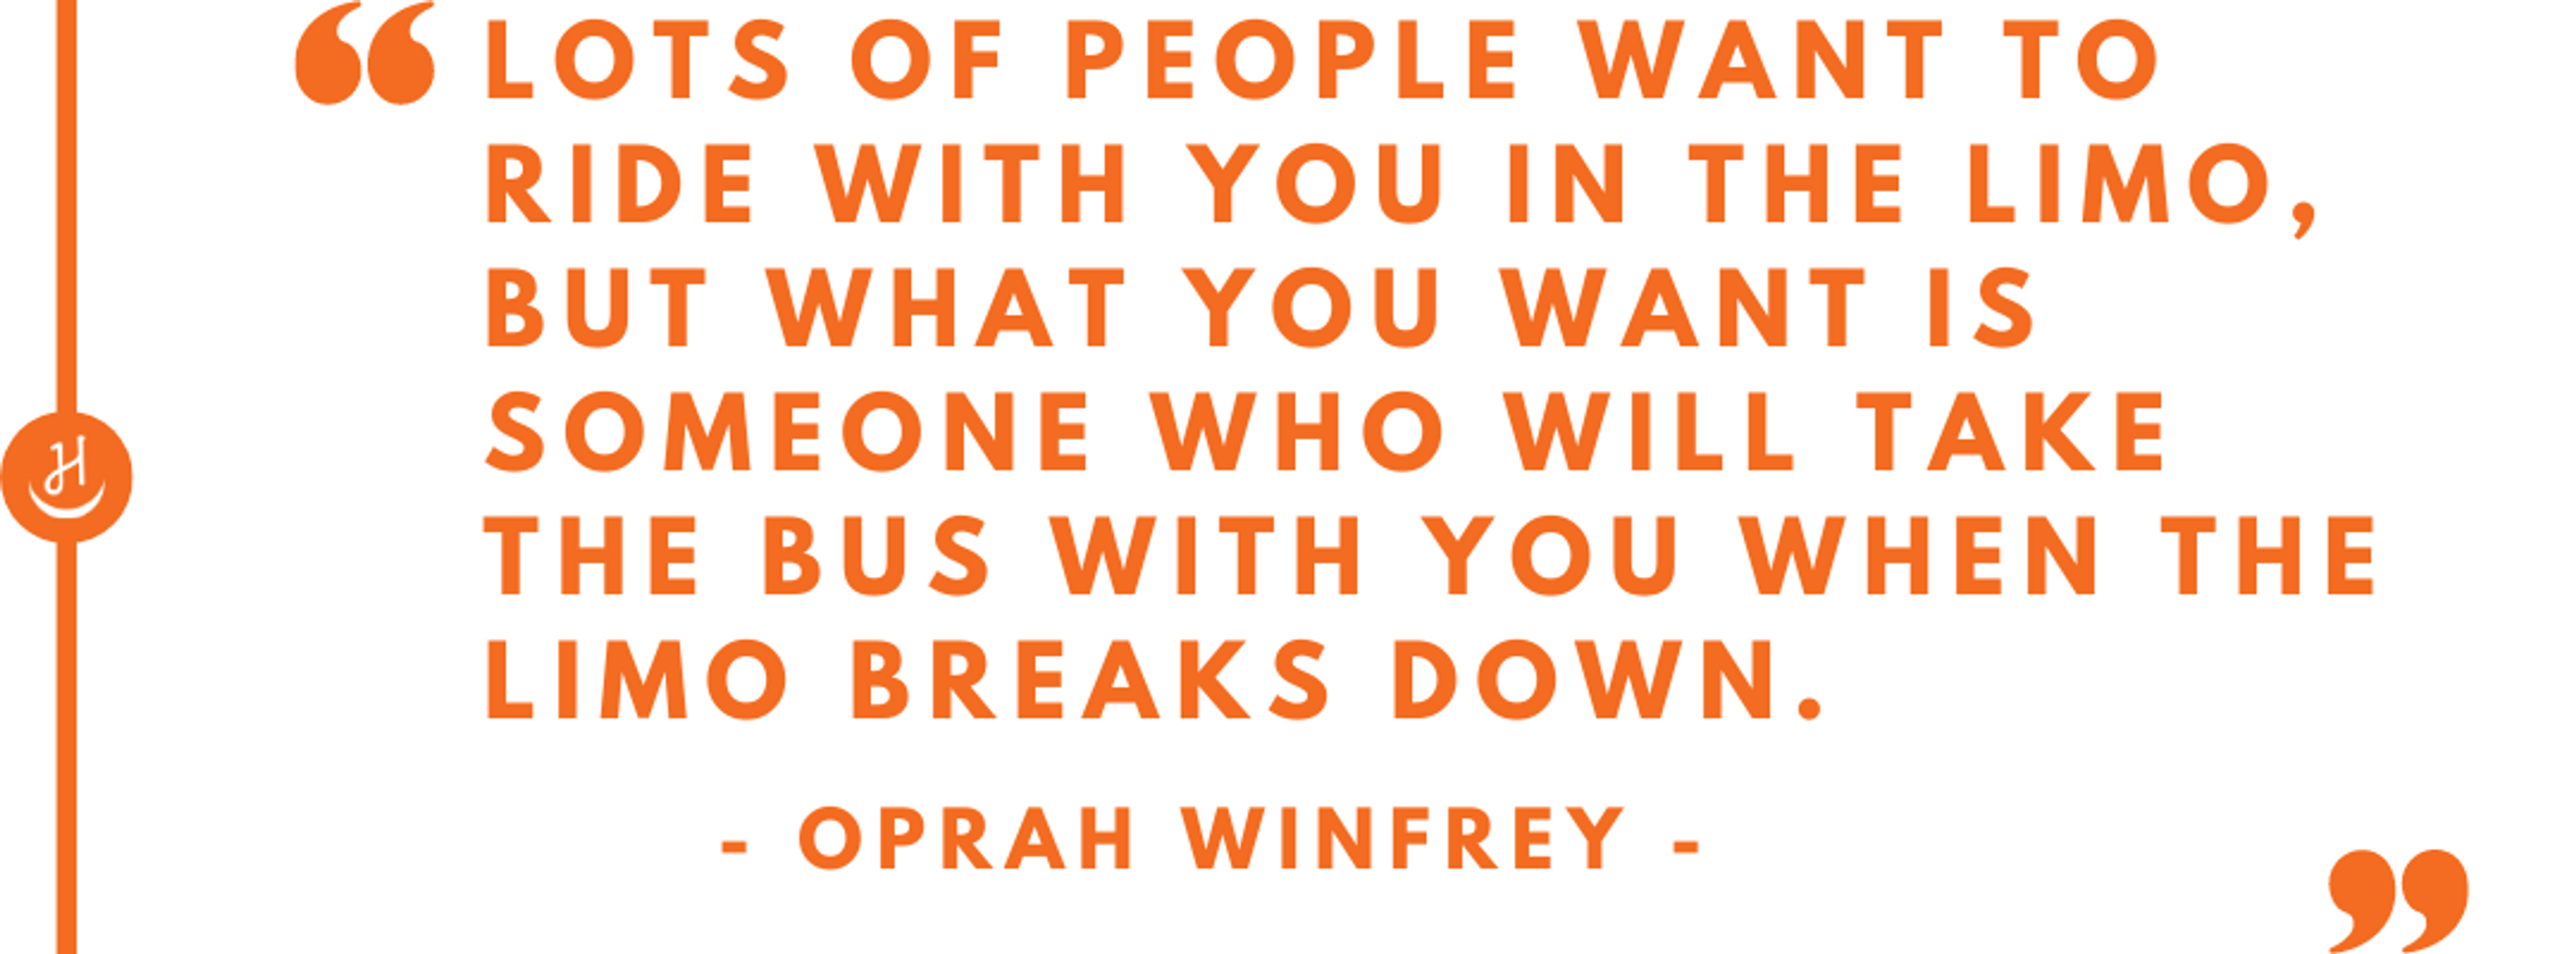 Quote by Oprah Winfrey that reads "Lots of people want to ride with you in the limo, but what you want is someone who will take the bus with you when the limo breaks down"